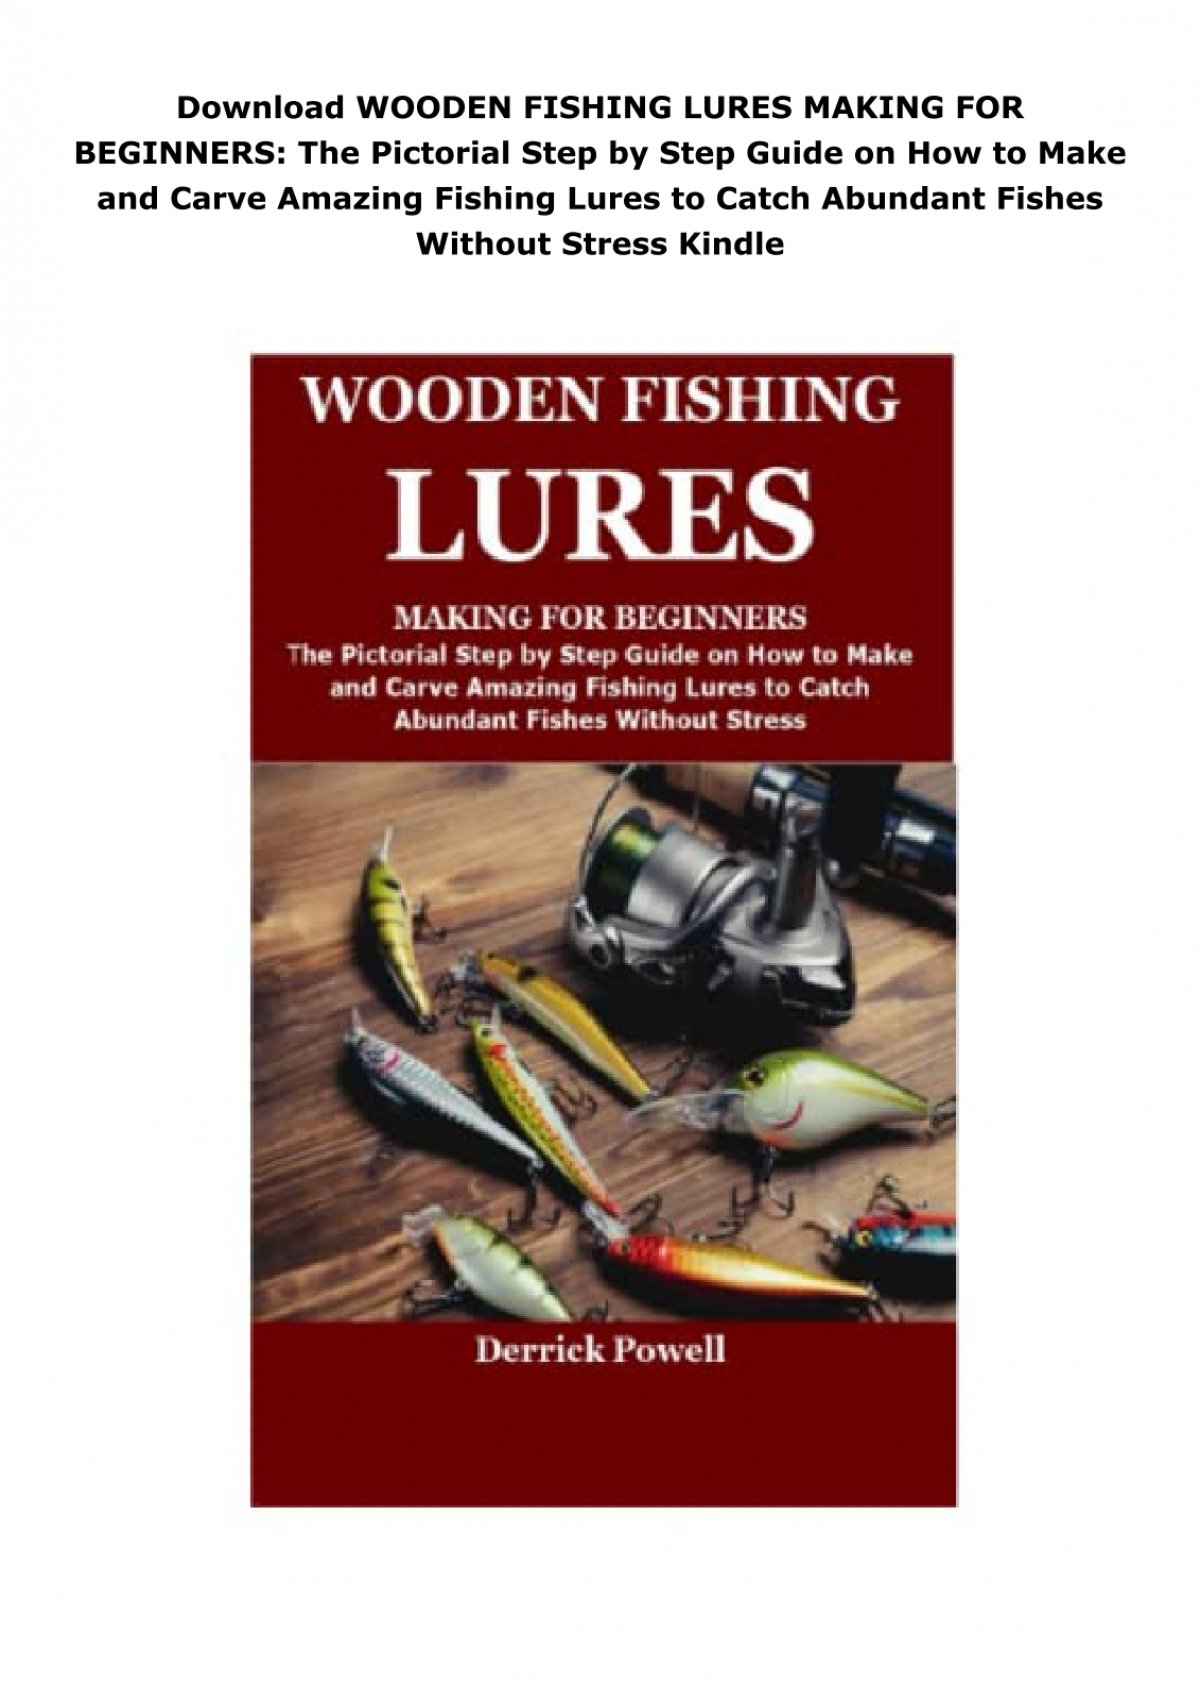 Download WOODEN FISHING LURES MAKING FOR BEGINNERS: The Pictorial Step by  Step Guide on How to Make and Carve Amazing Fishing Lures to Catch Abundant  Fishes Without Stress Kindle